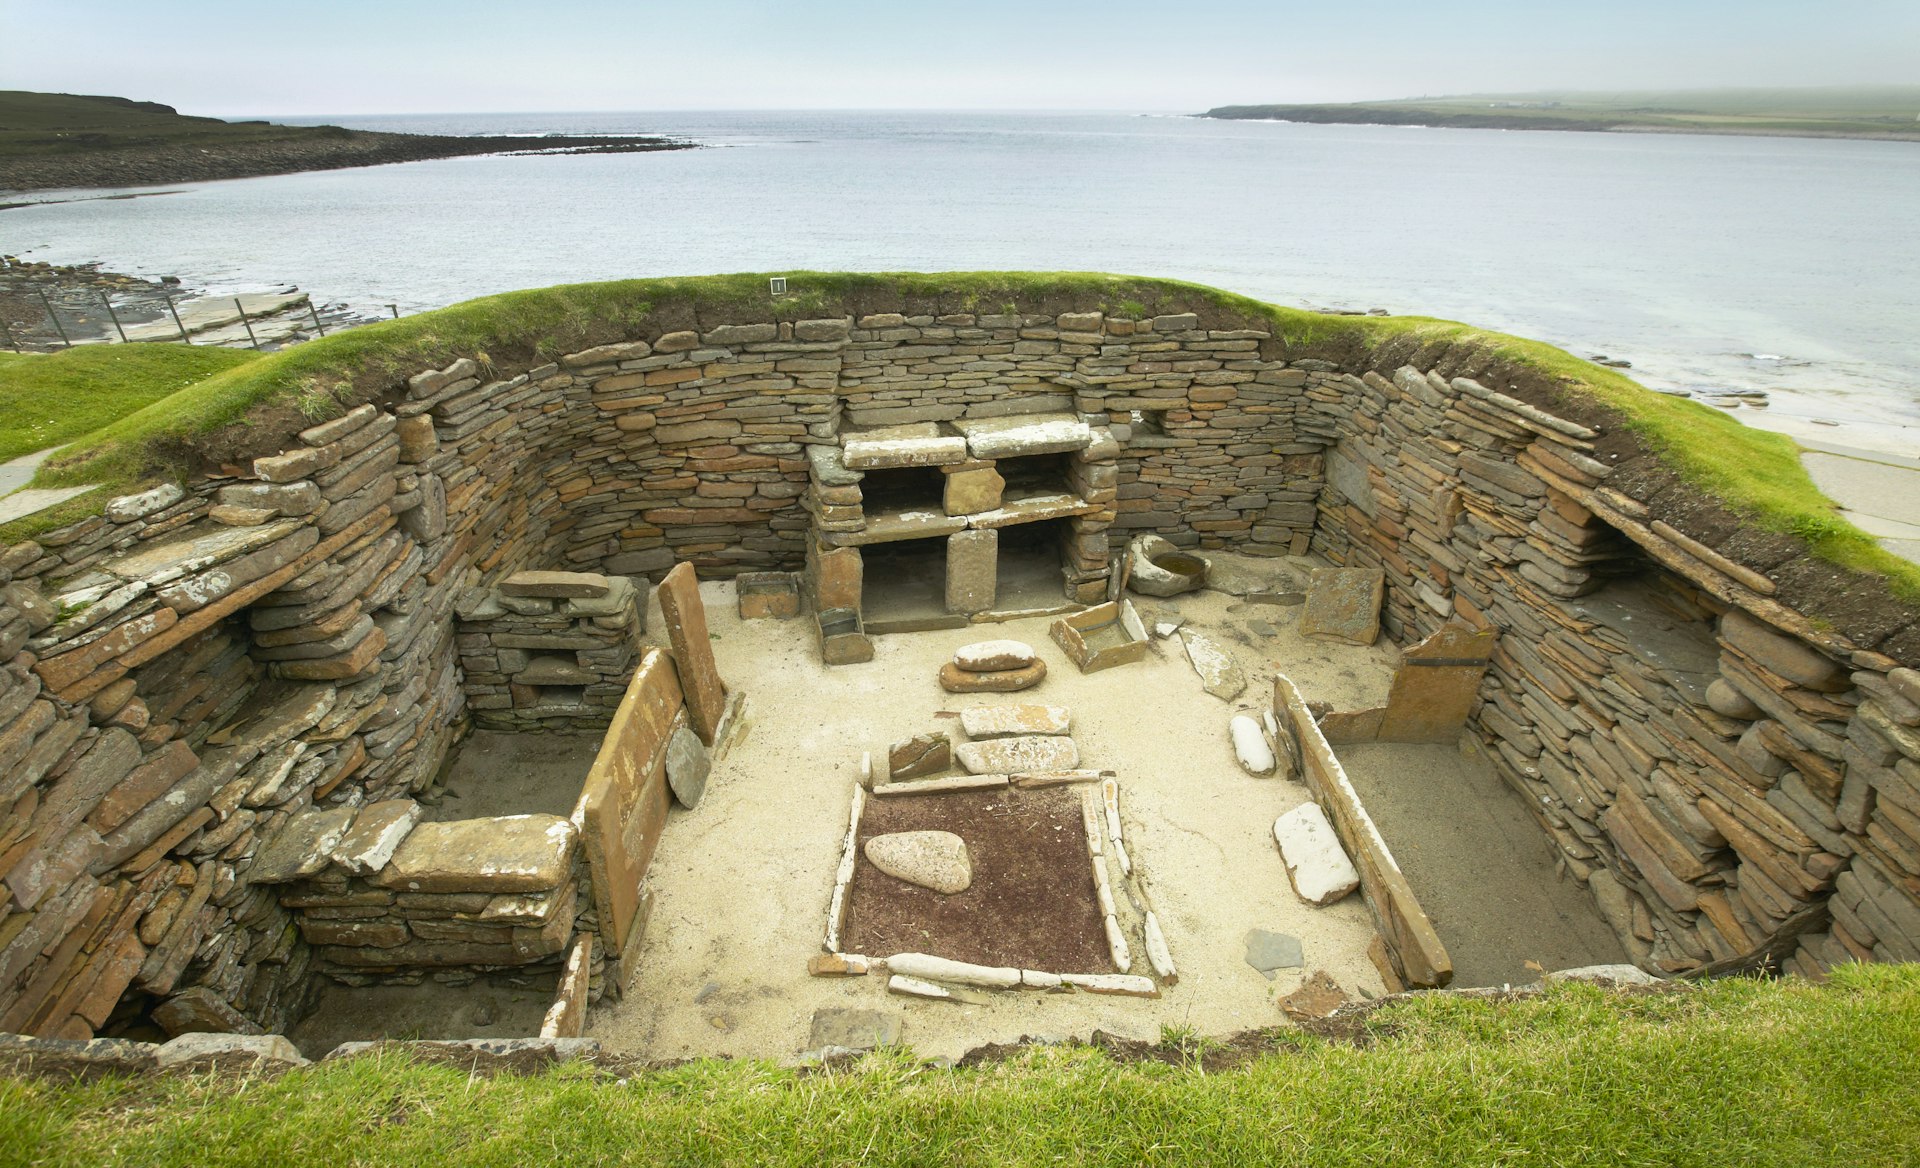 A roofless room dug into the ground, with stones stacked around the edges to support the walls